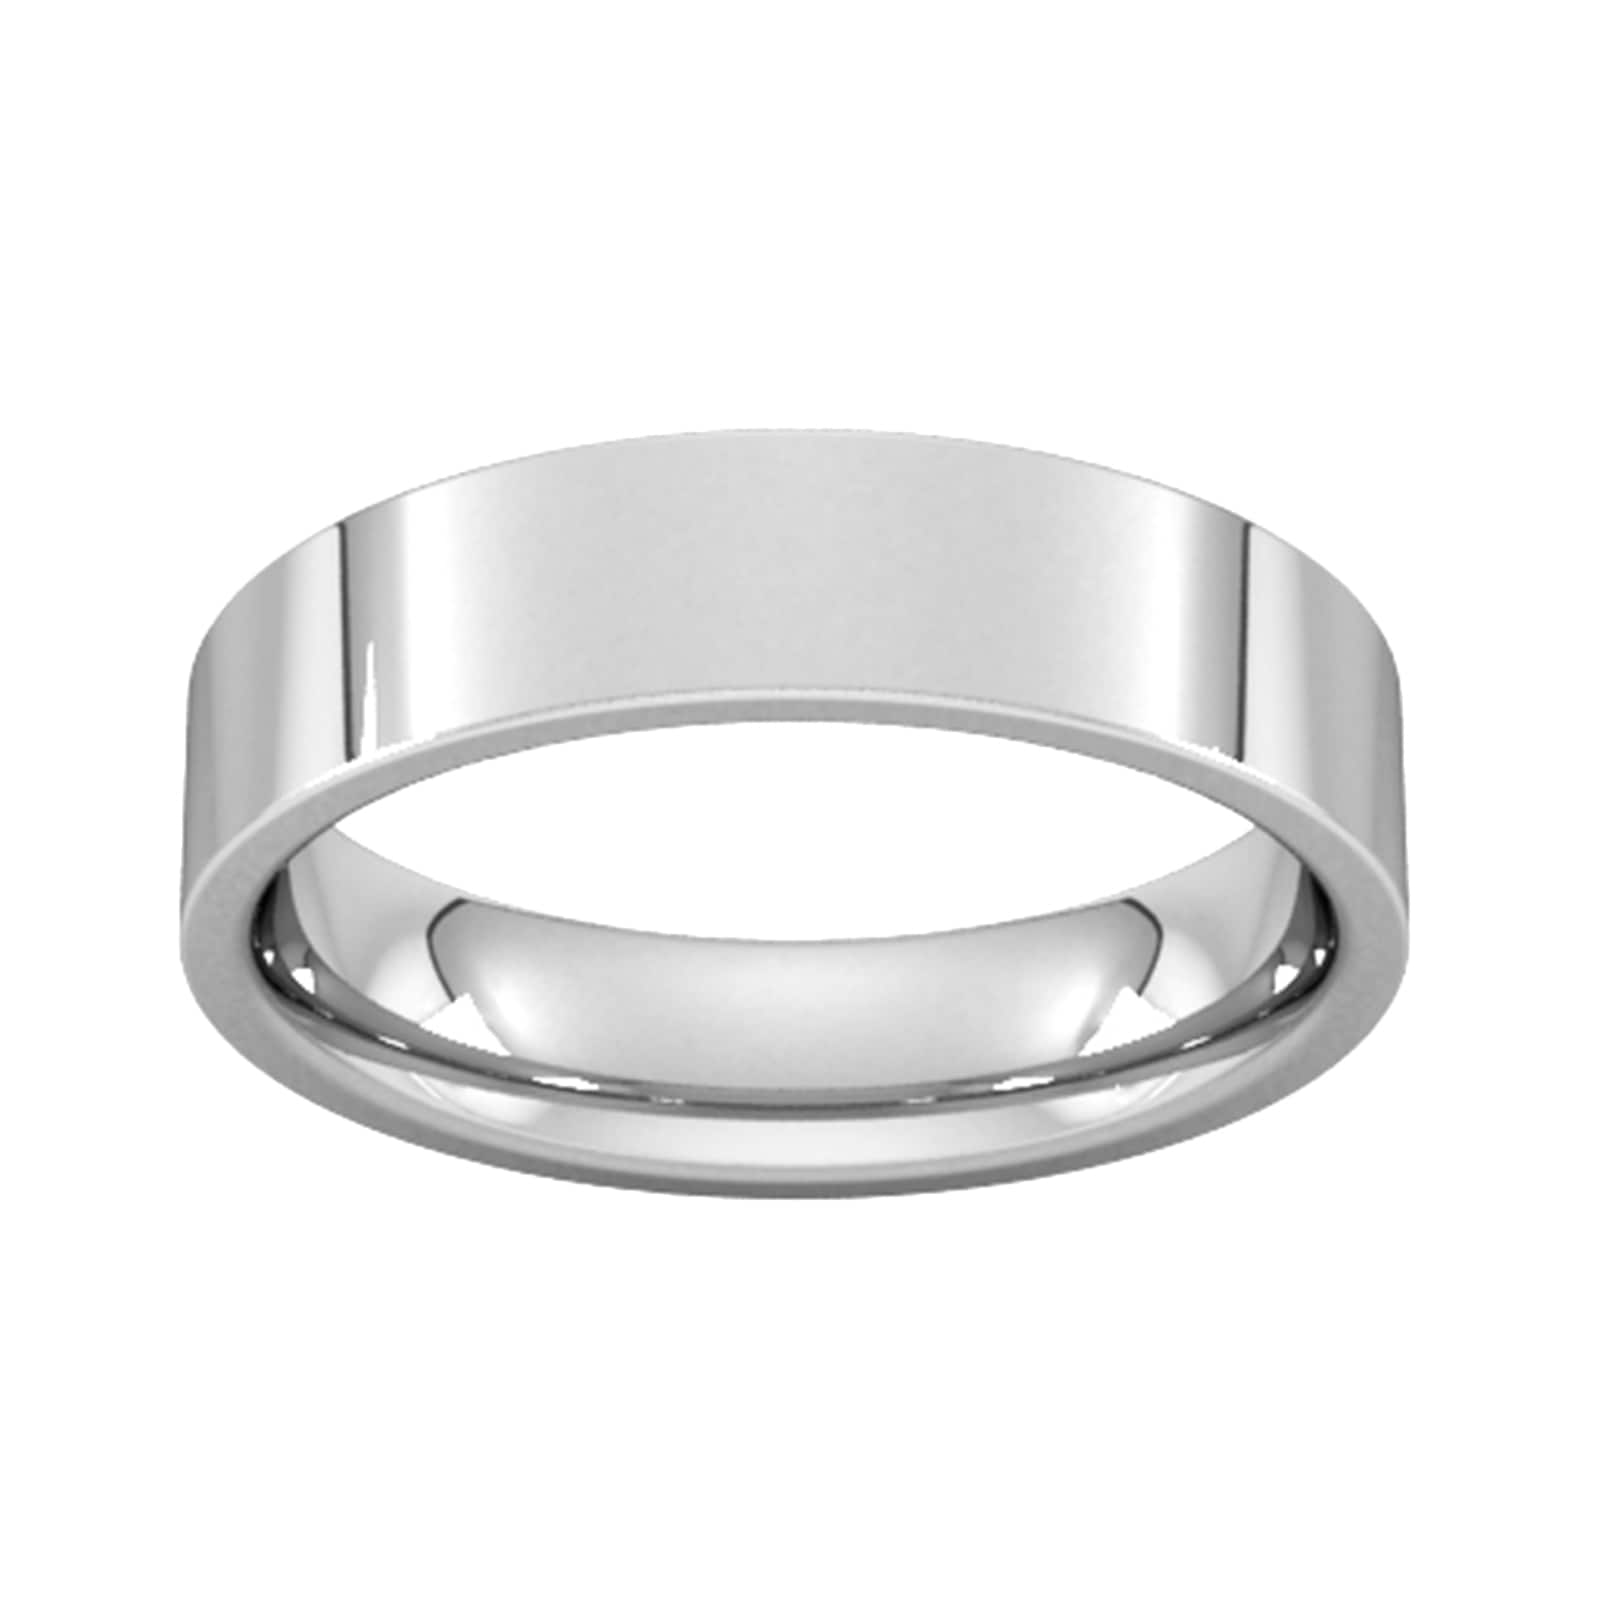 5mm Flat Court Heavy Wedding Ring In 9 Carat White Gold - Ring Size M